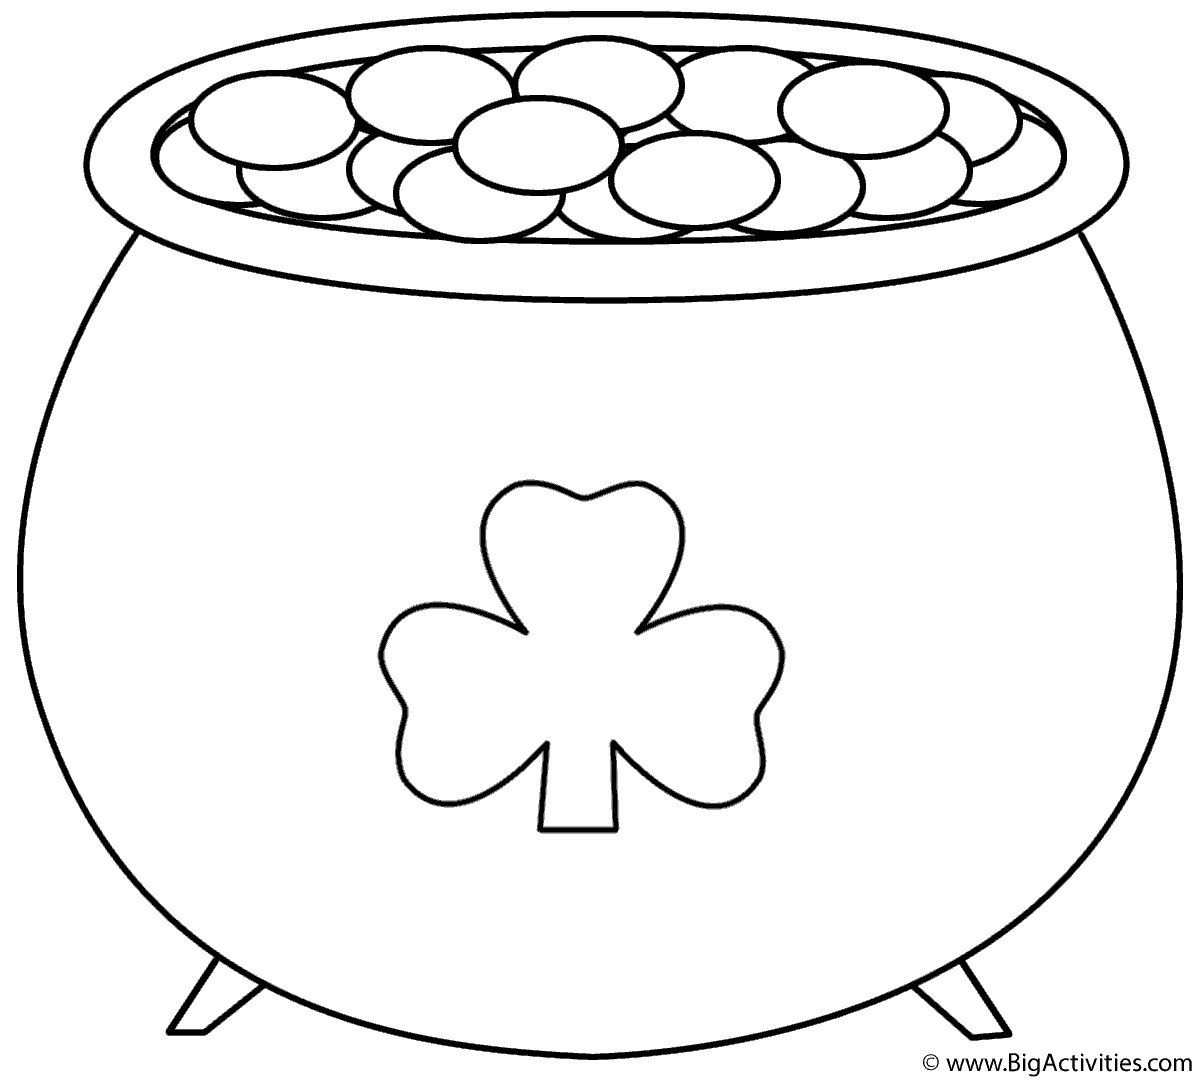 o byrnes st patricks day coloring pages - photo #48